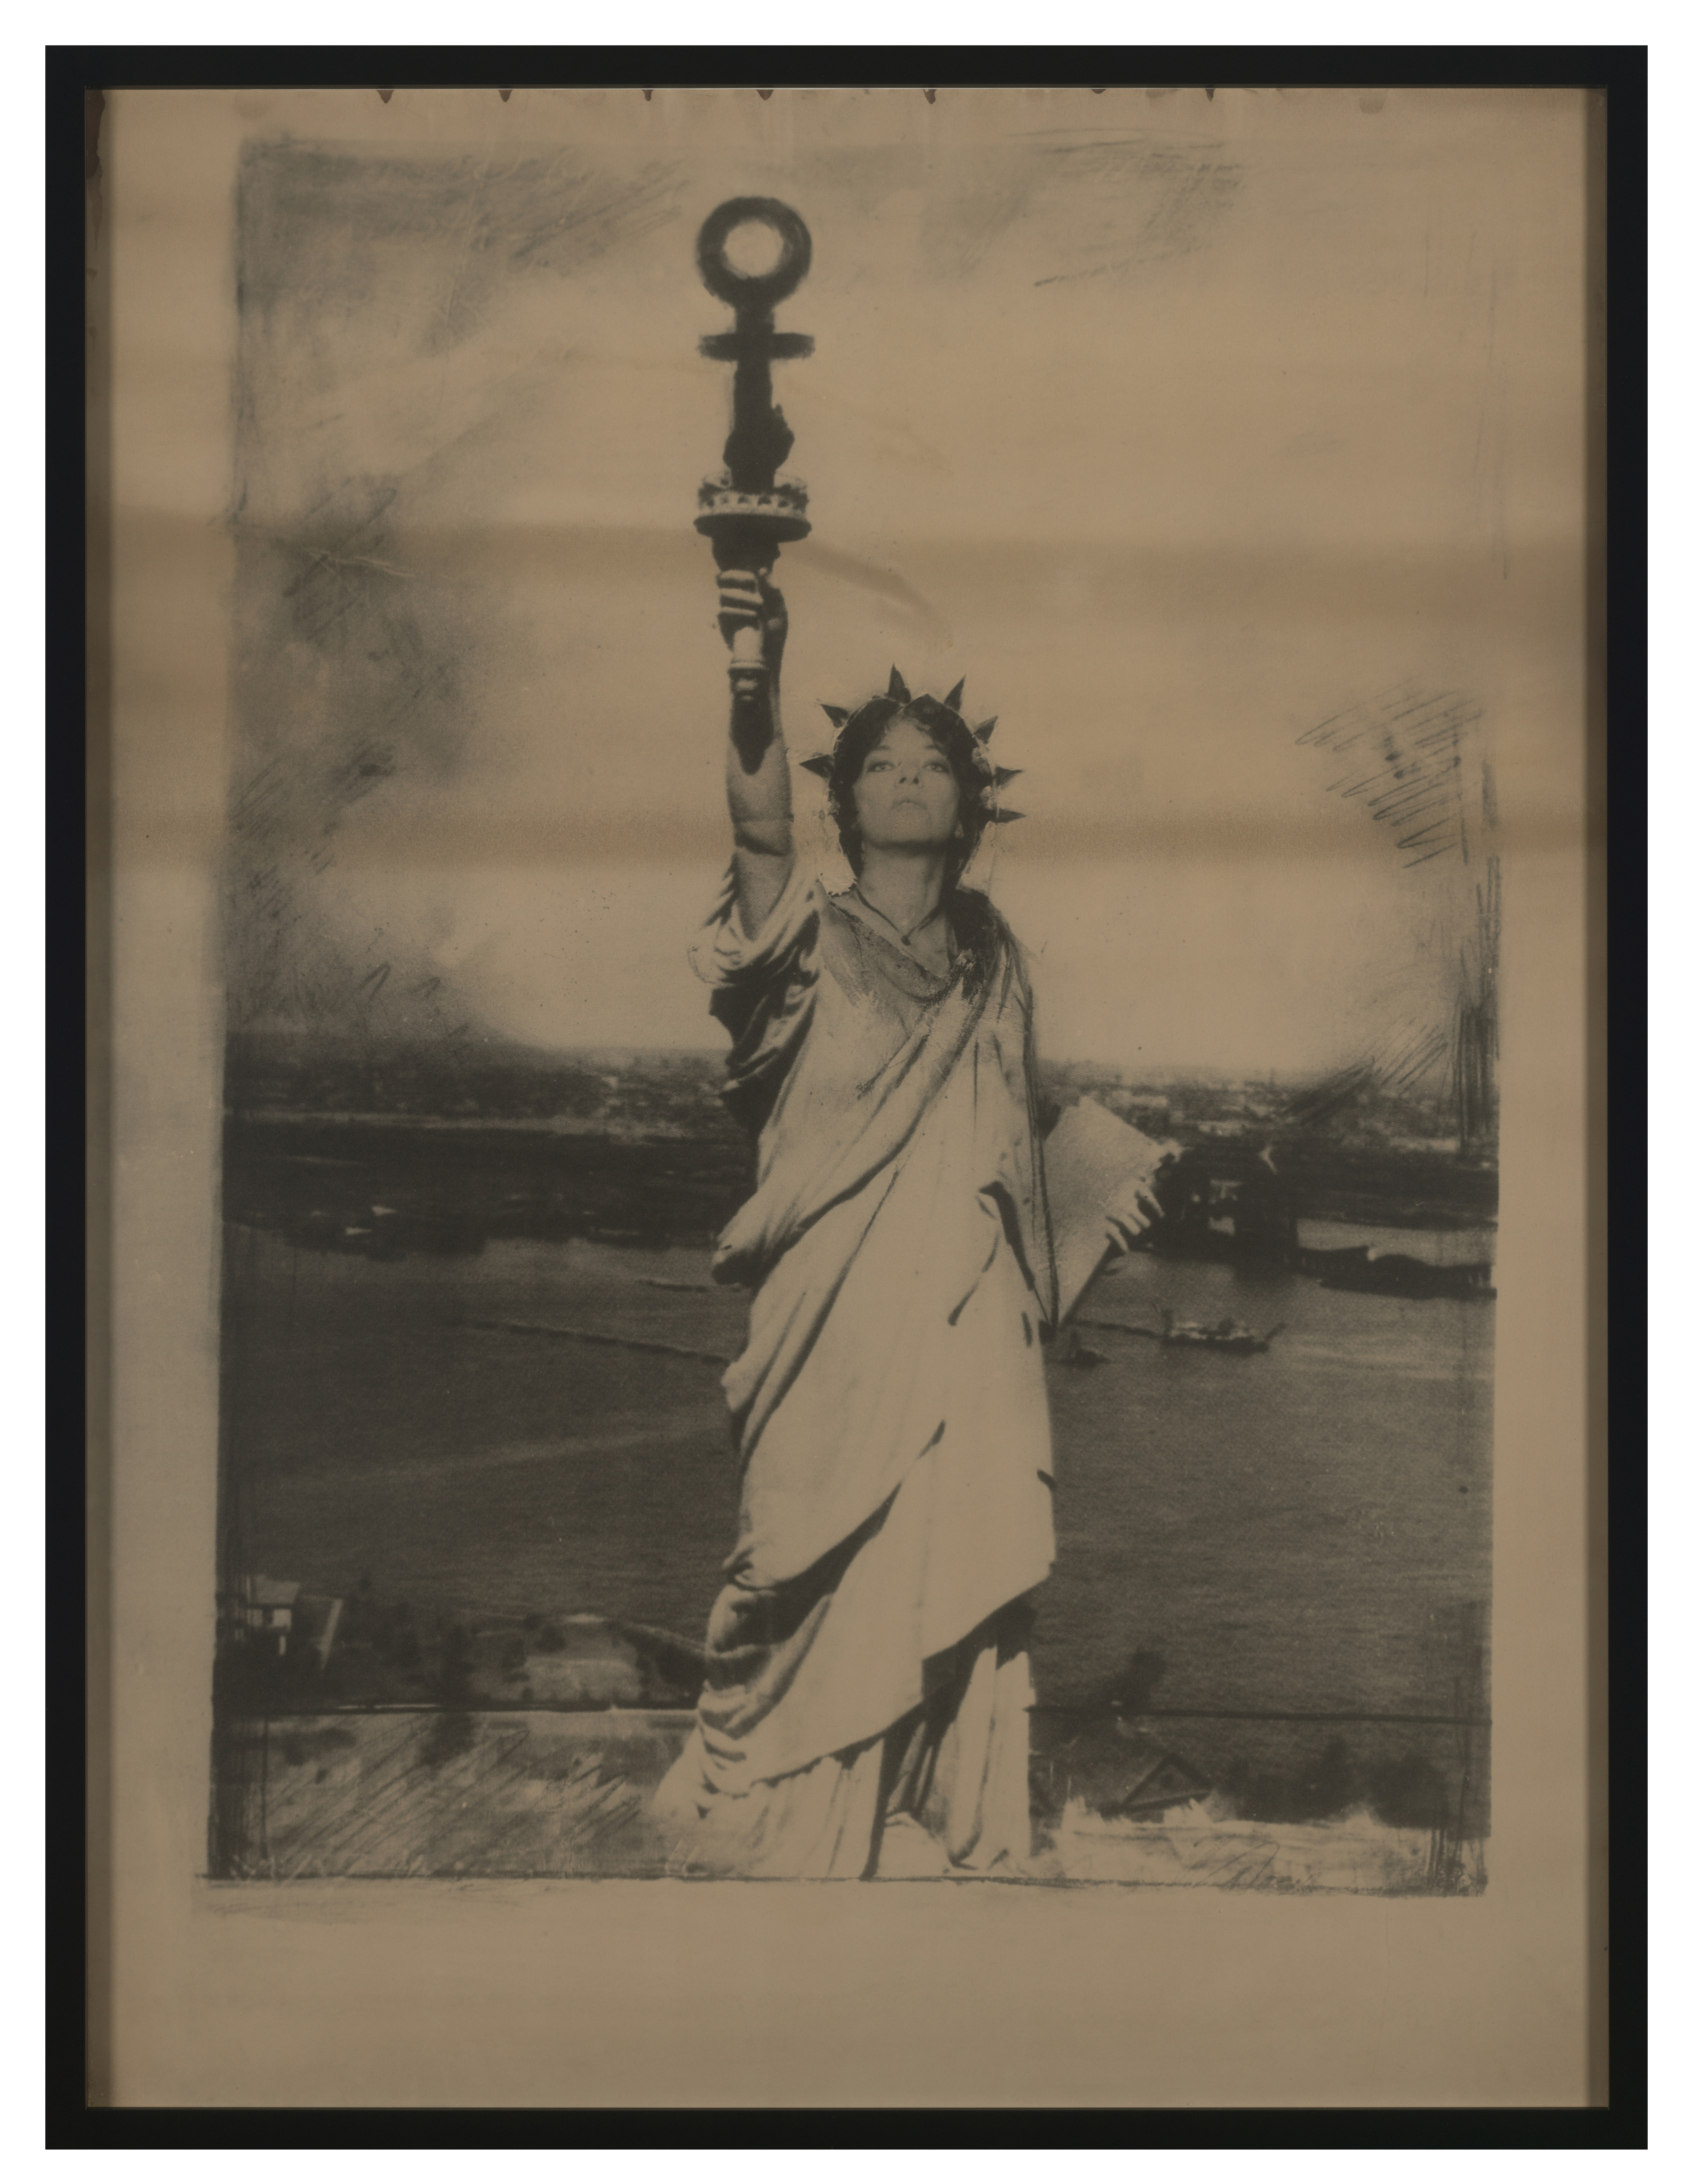 Photo monotype of the artists as the Stature of Liberty holding the symbol for a woman in place of a torch